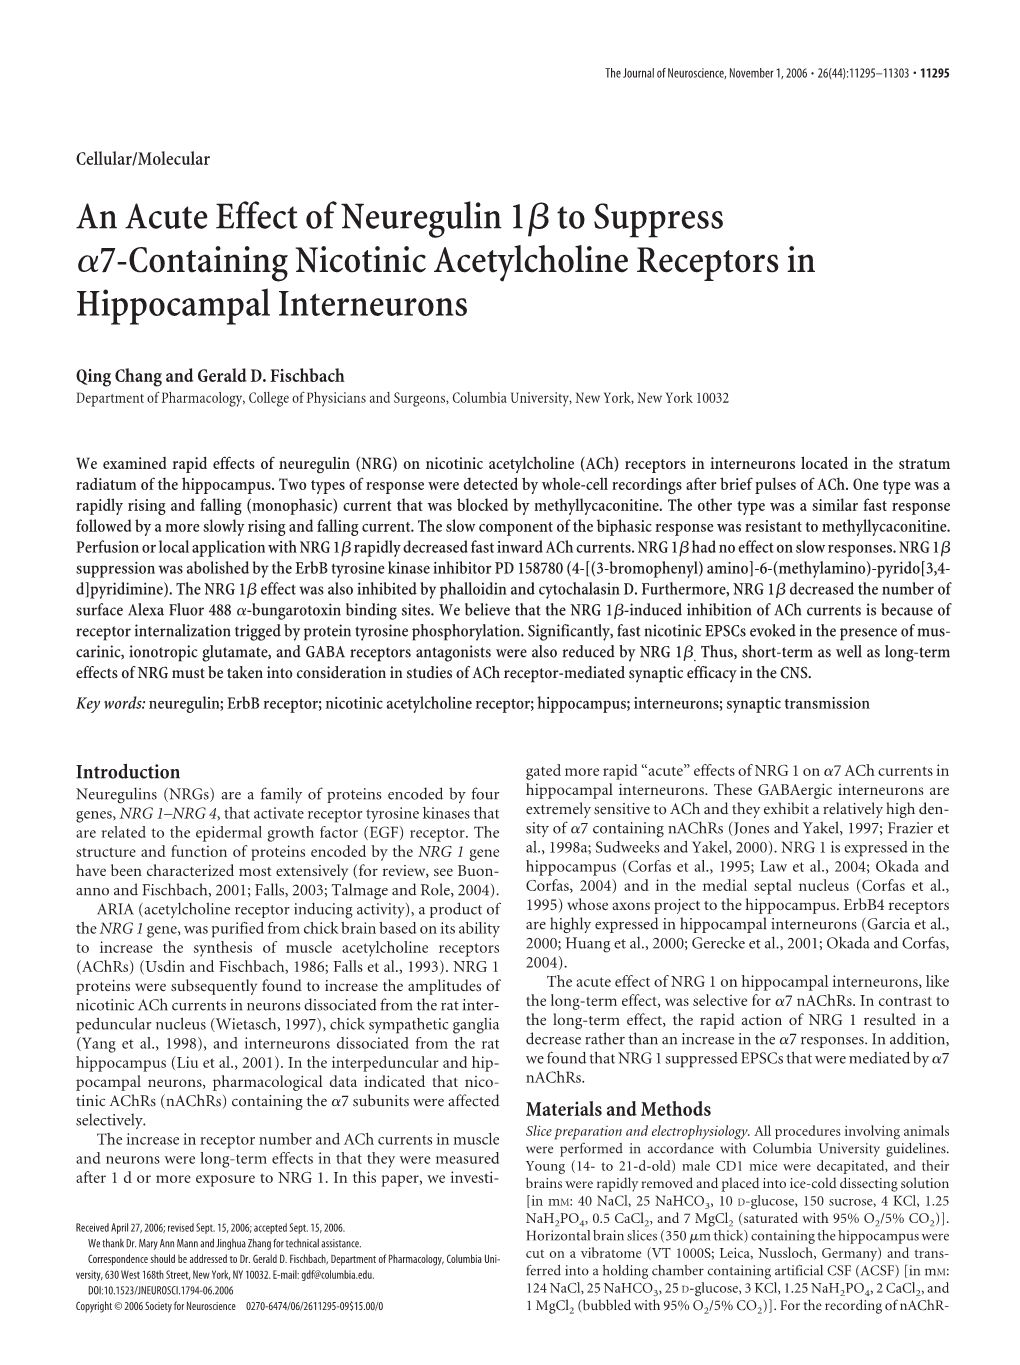 An Acute Effect of Neuregulin 1Яto Suppress Α7-Containing Nicotinic